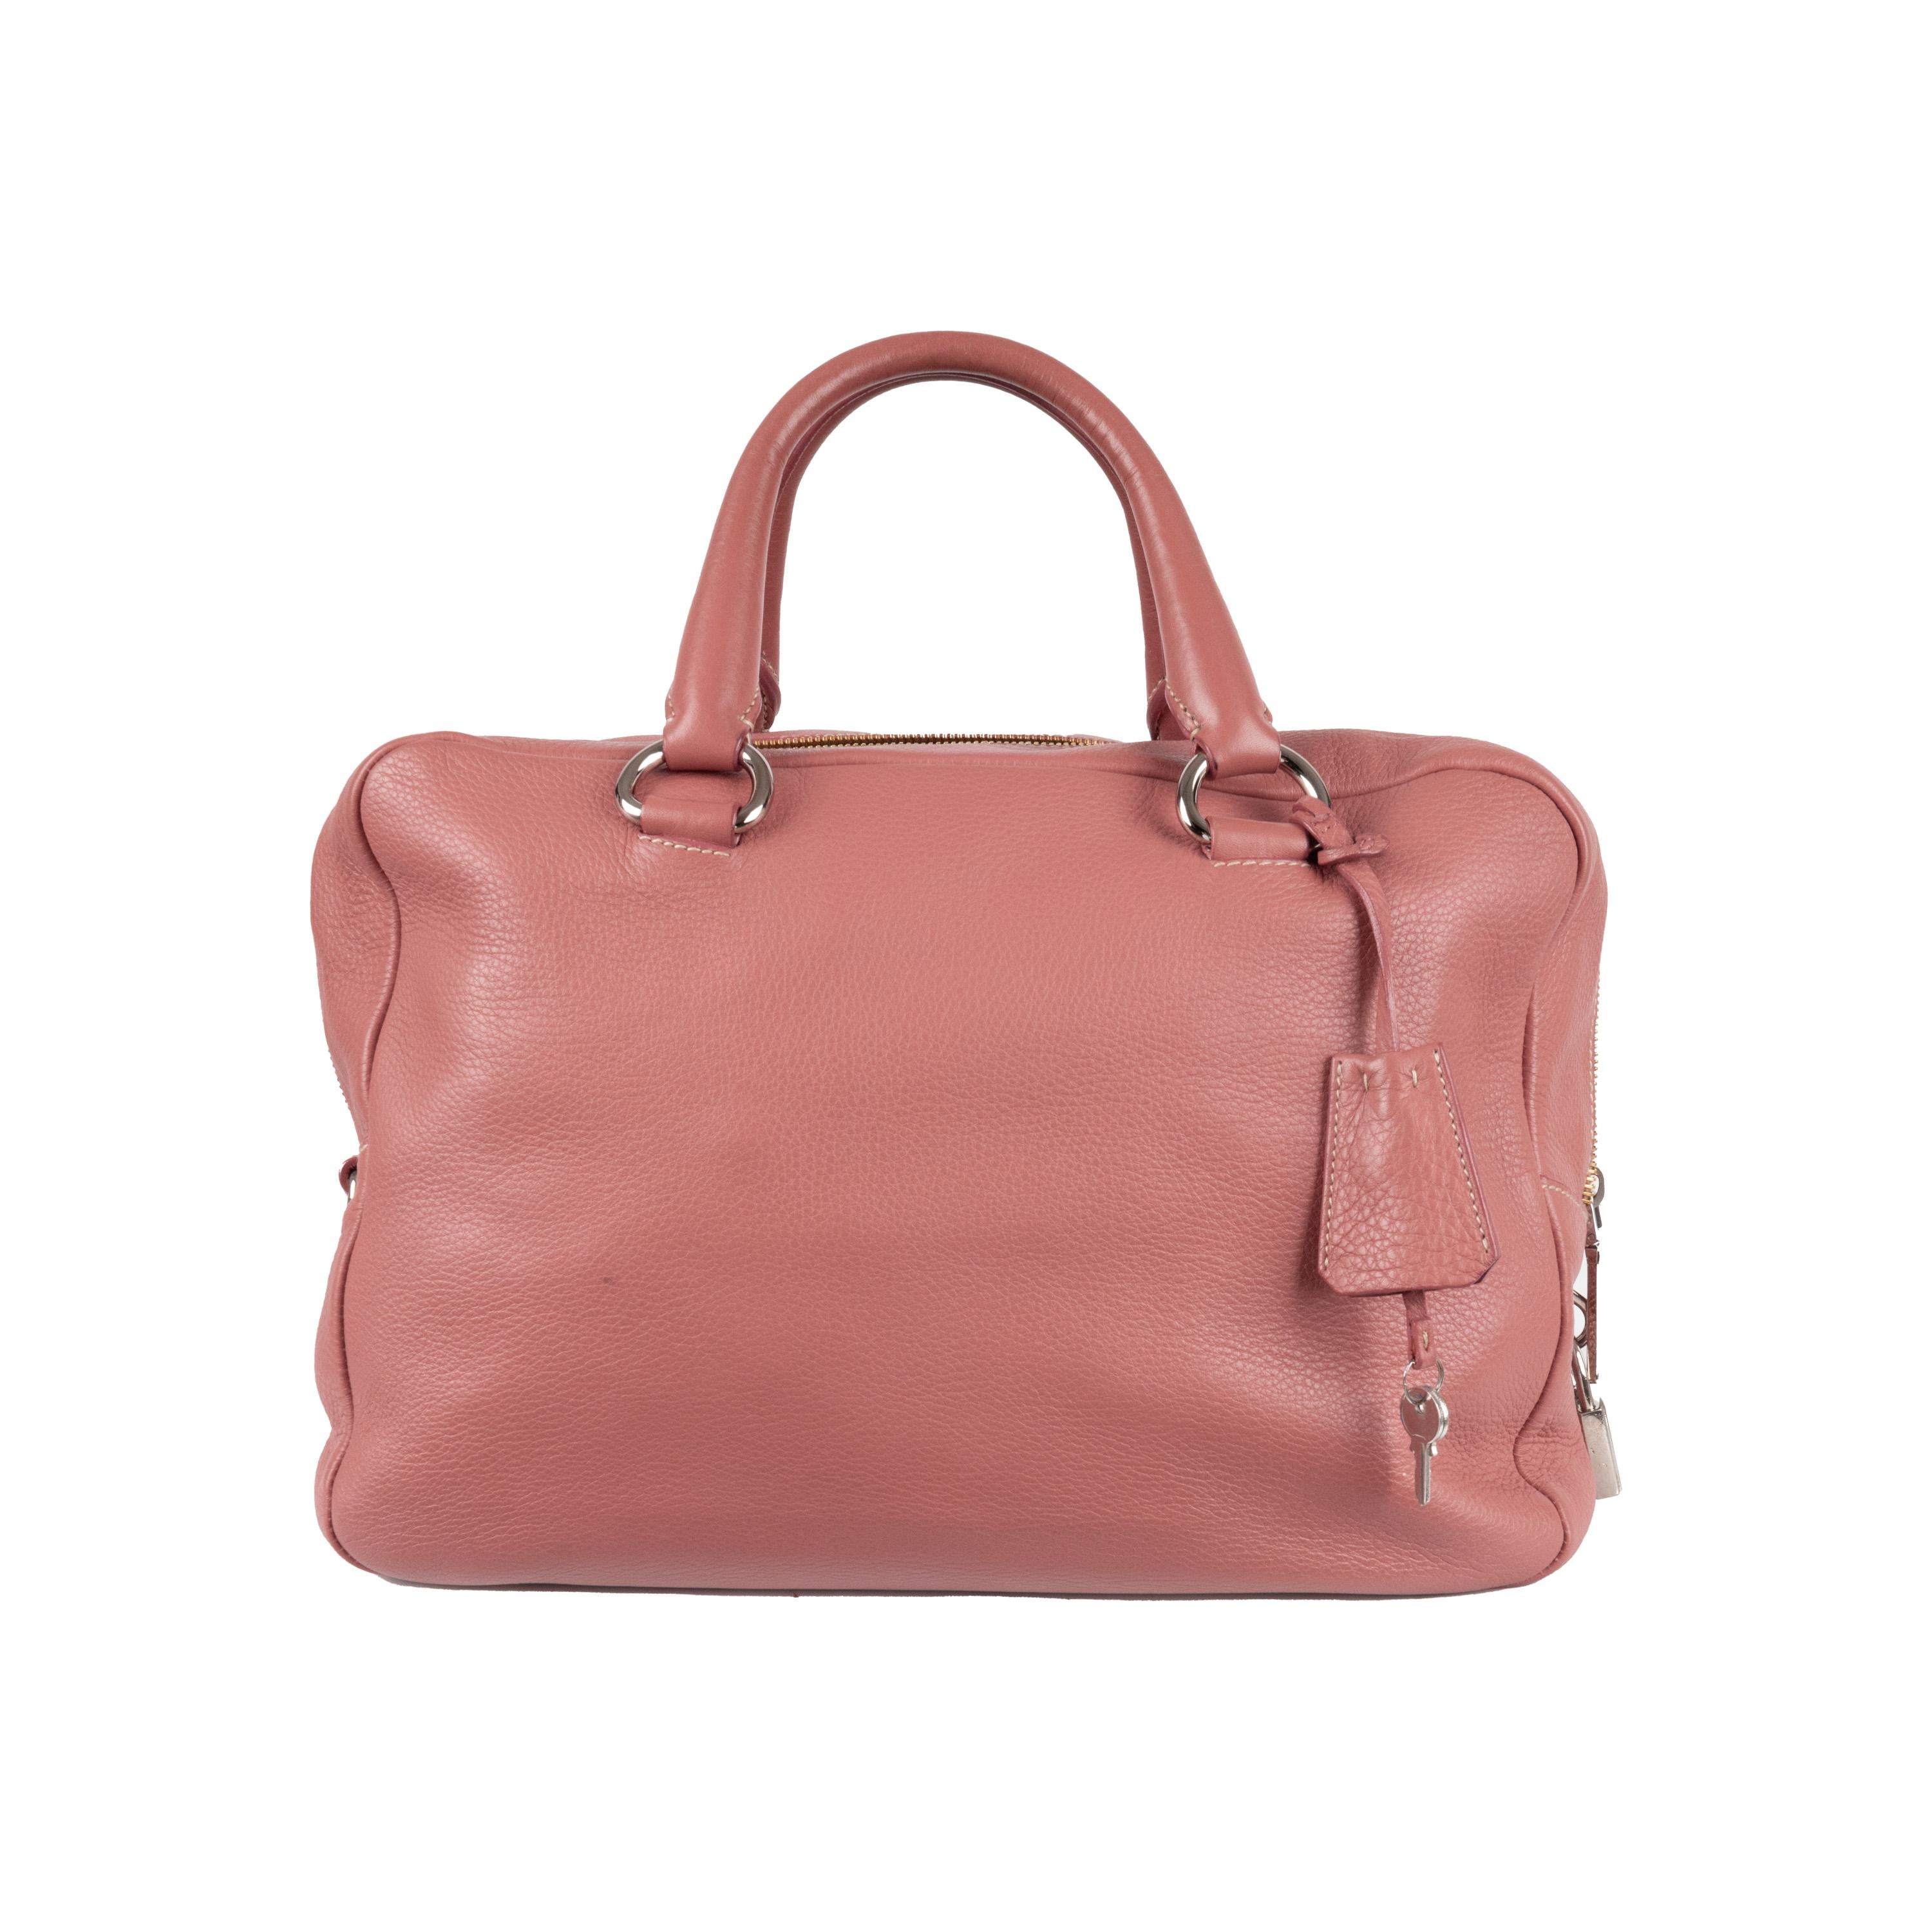 Expertly crafted with soft supple leather in pink, the Prada Boston Handbag is the ultimate everyday accessory. Its ample size comfortably holds all your essentials, while the double zipper detail and silver hardware add a touch of elegance.